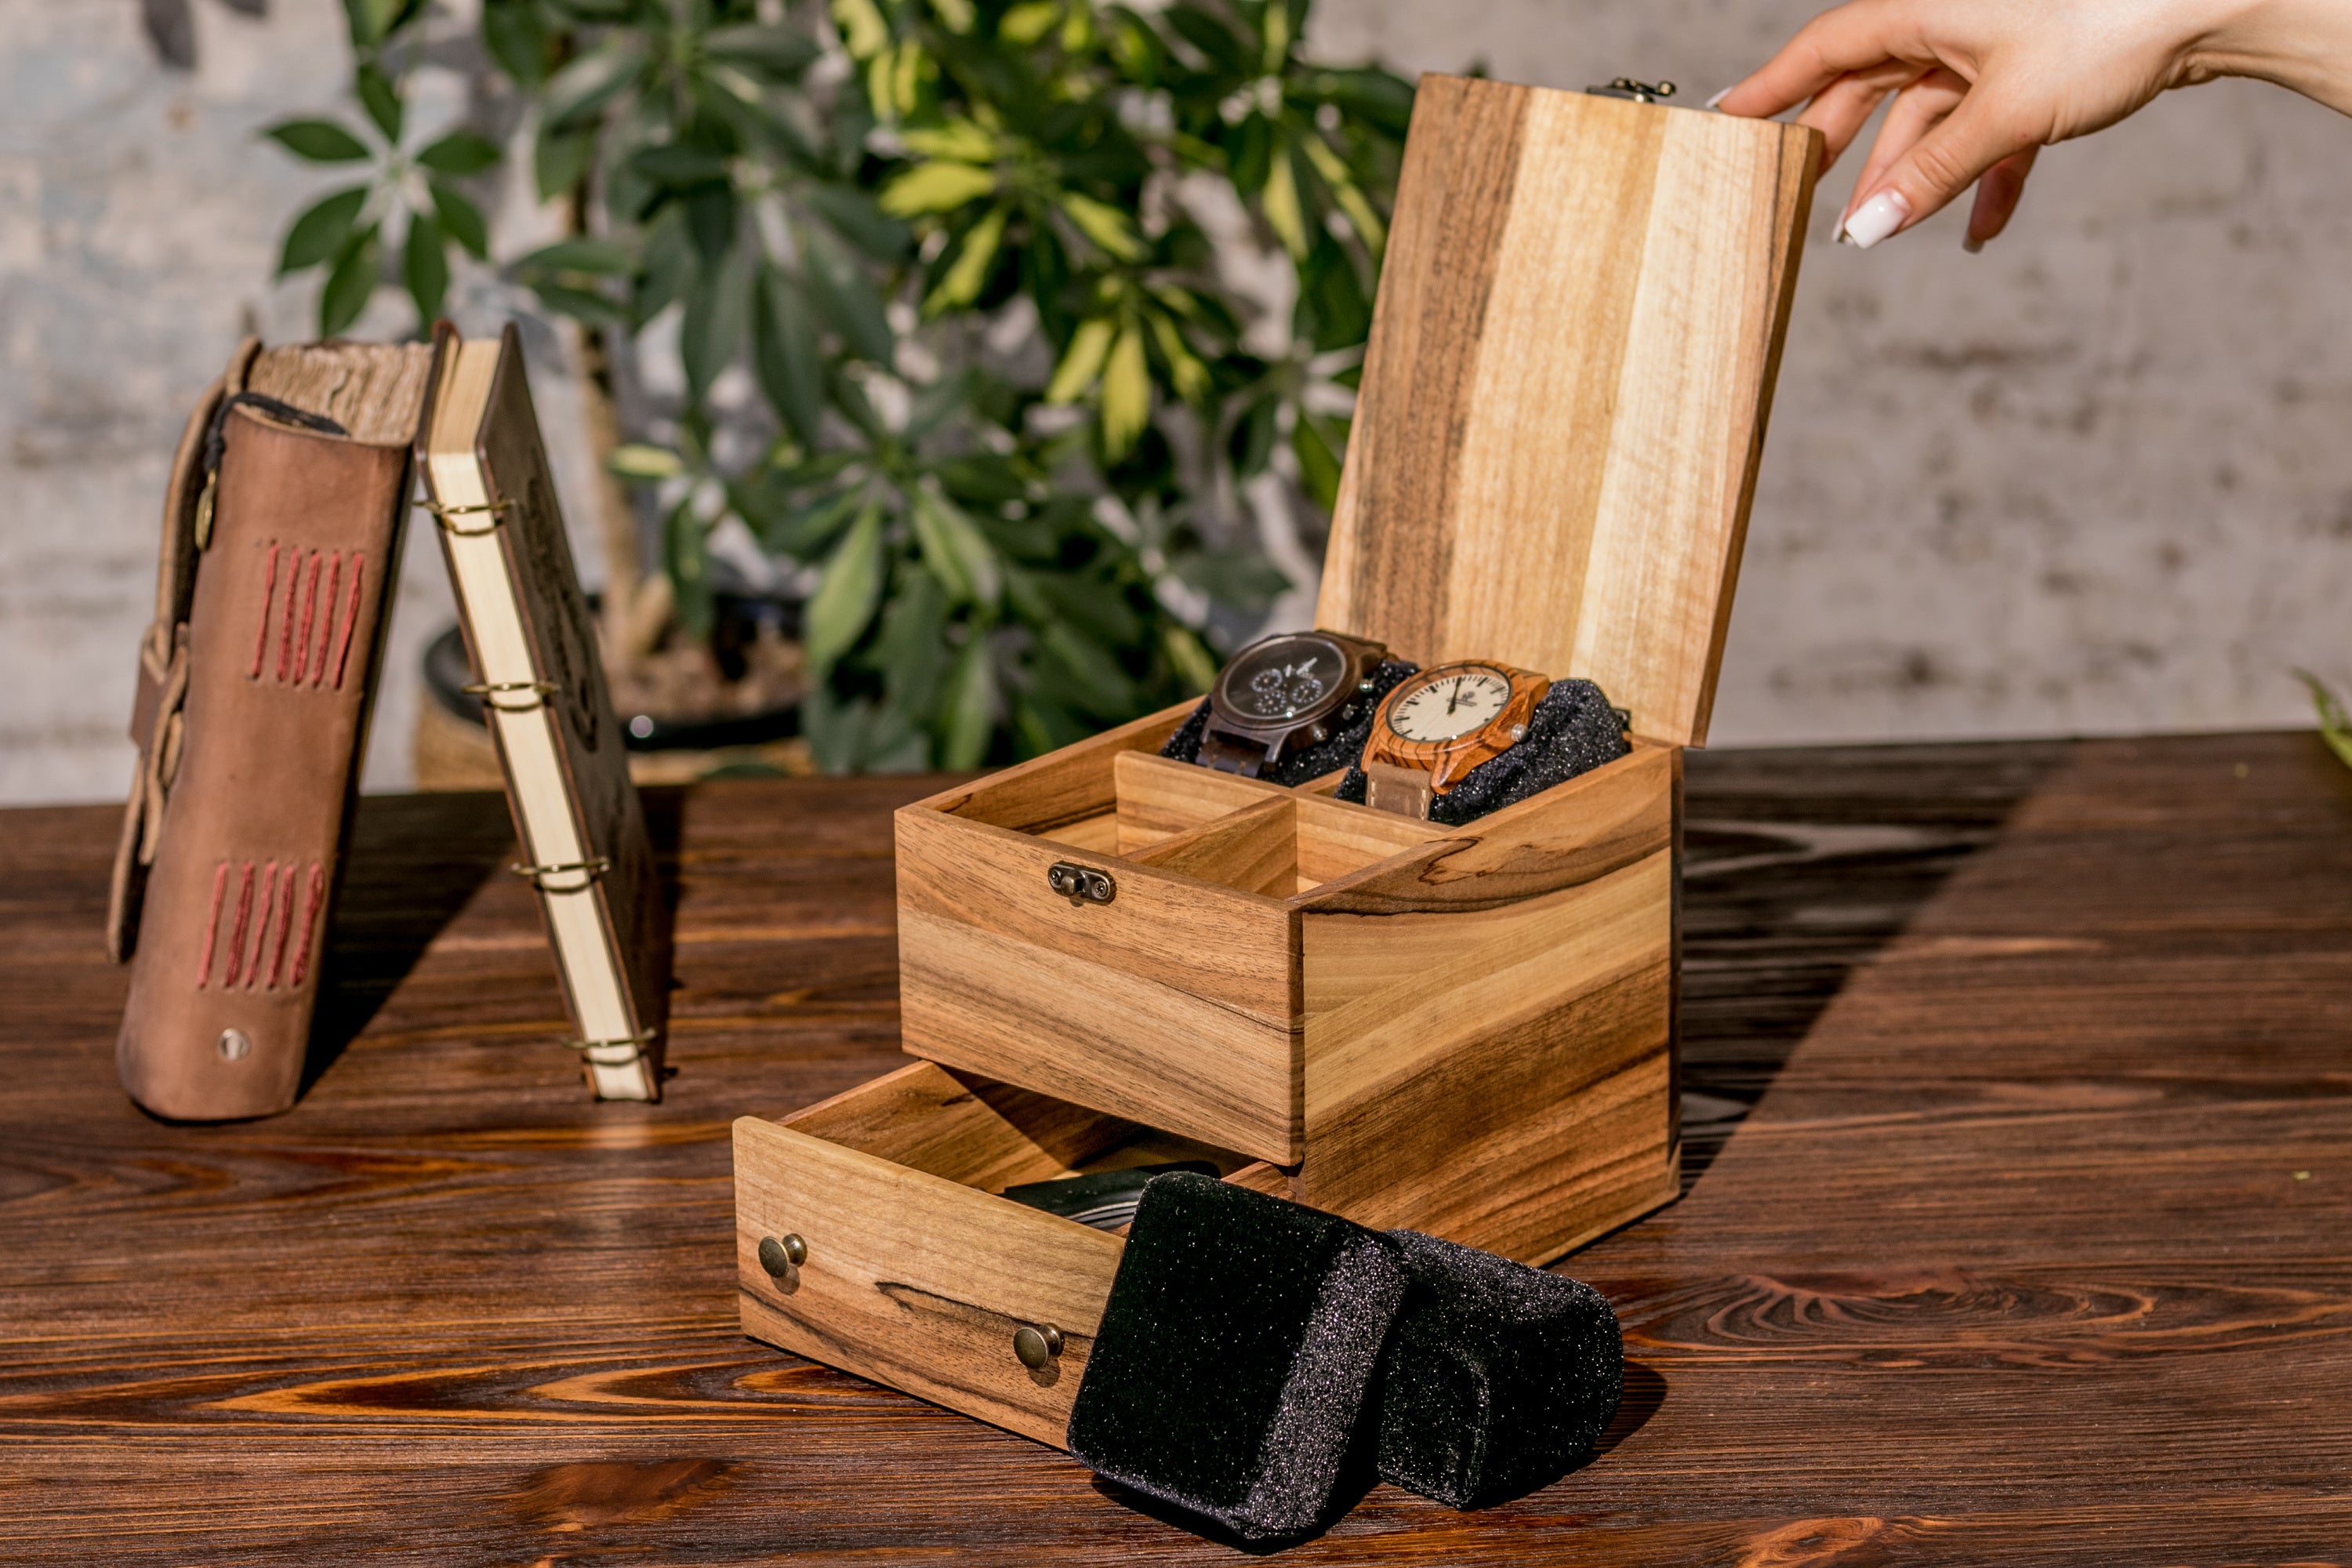 Watch box with accessory drawer - 4 Watches